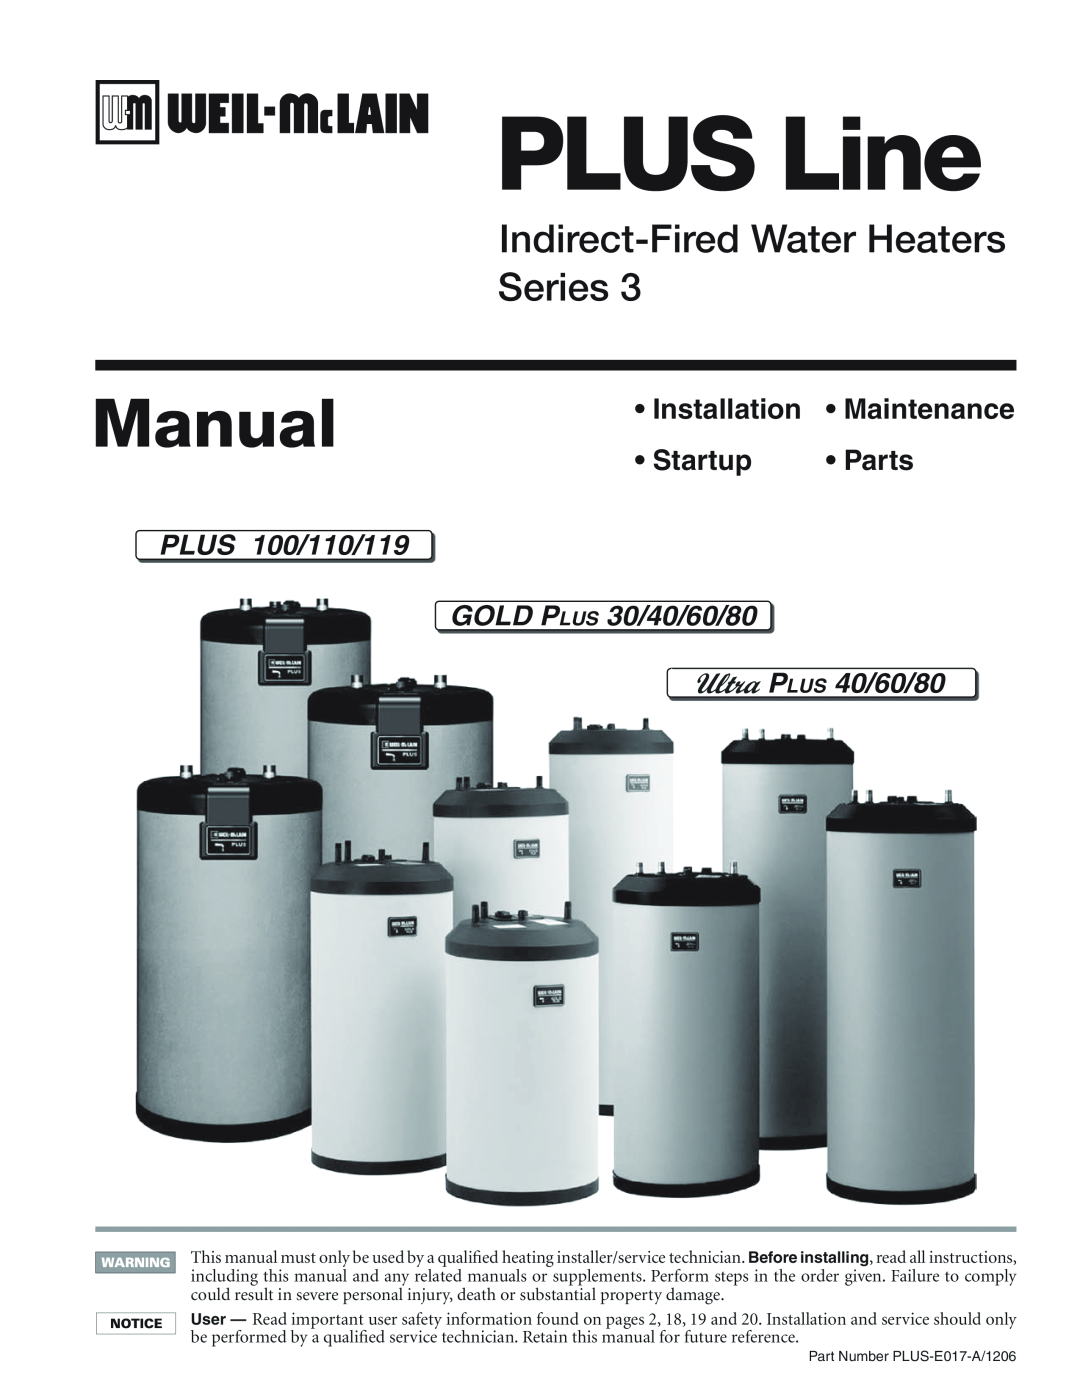 Weil-McLain PLUS-E017-A/1206 manual PLUS Line, Manual, Indirect-FiredWater Heaters Series, Installation, Maintenance 